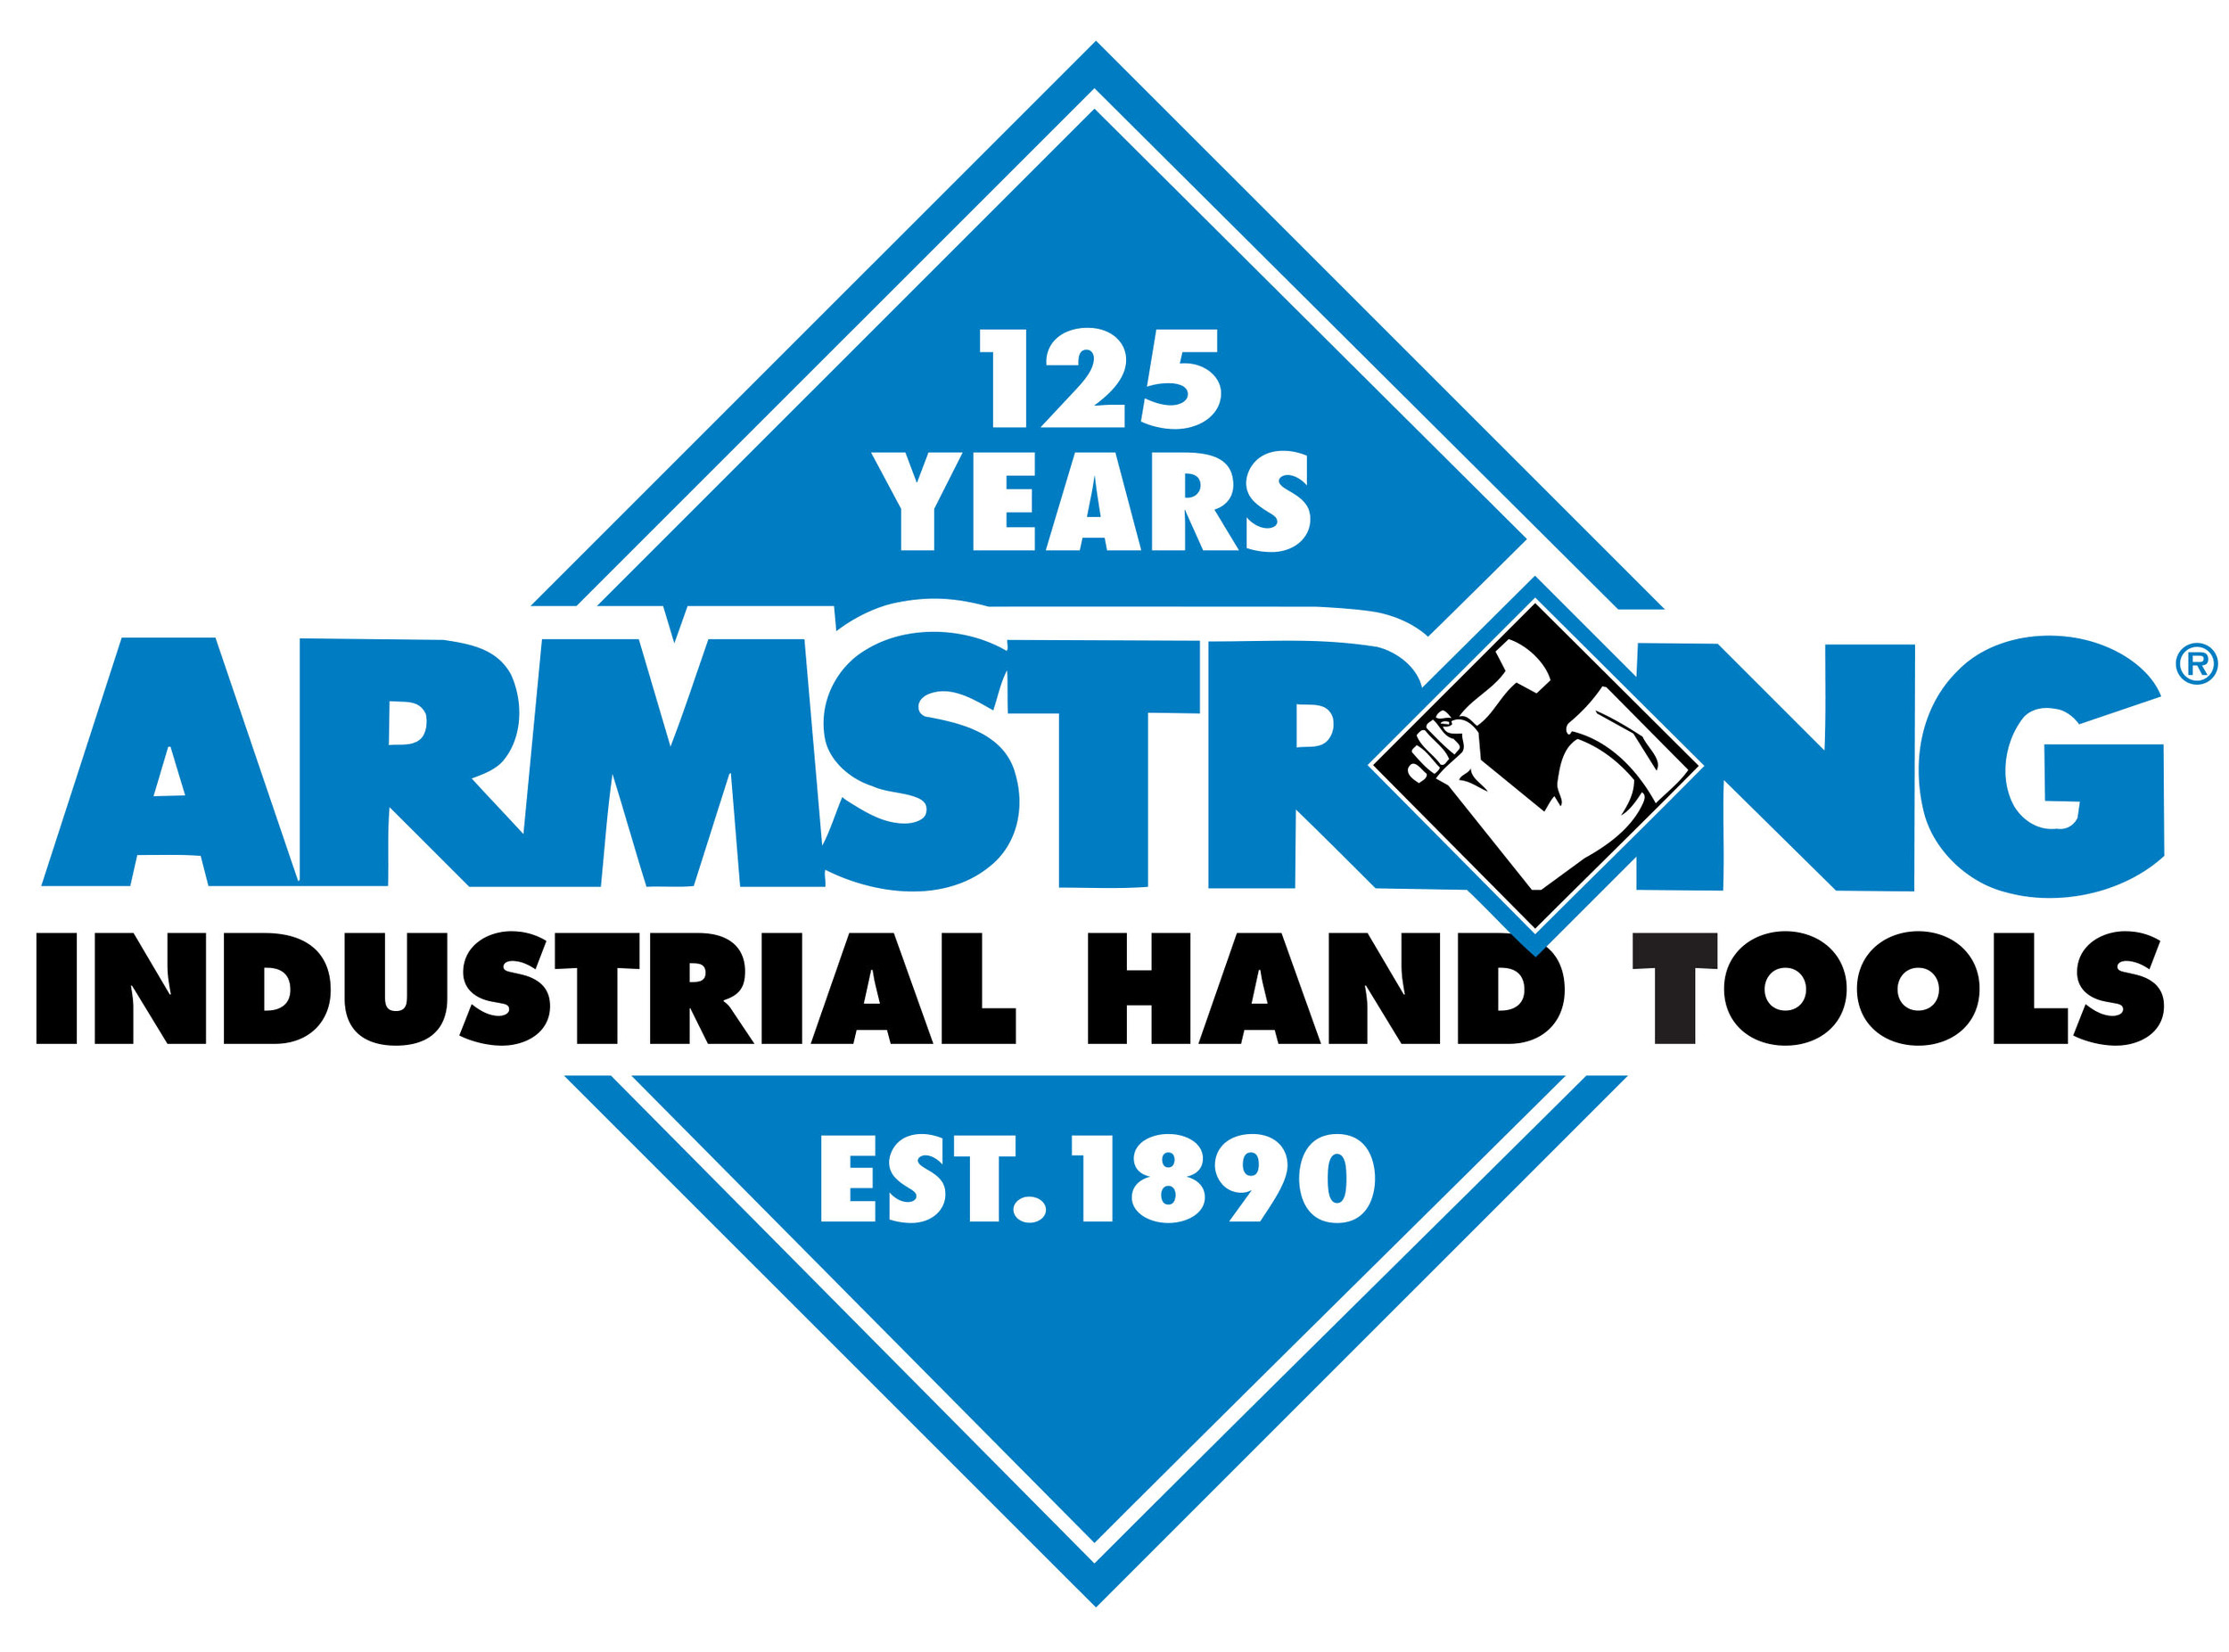 armstrong-industrial-hand-tools.jpeg